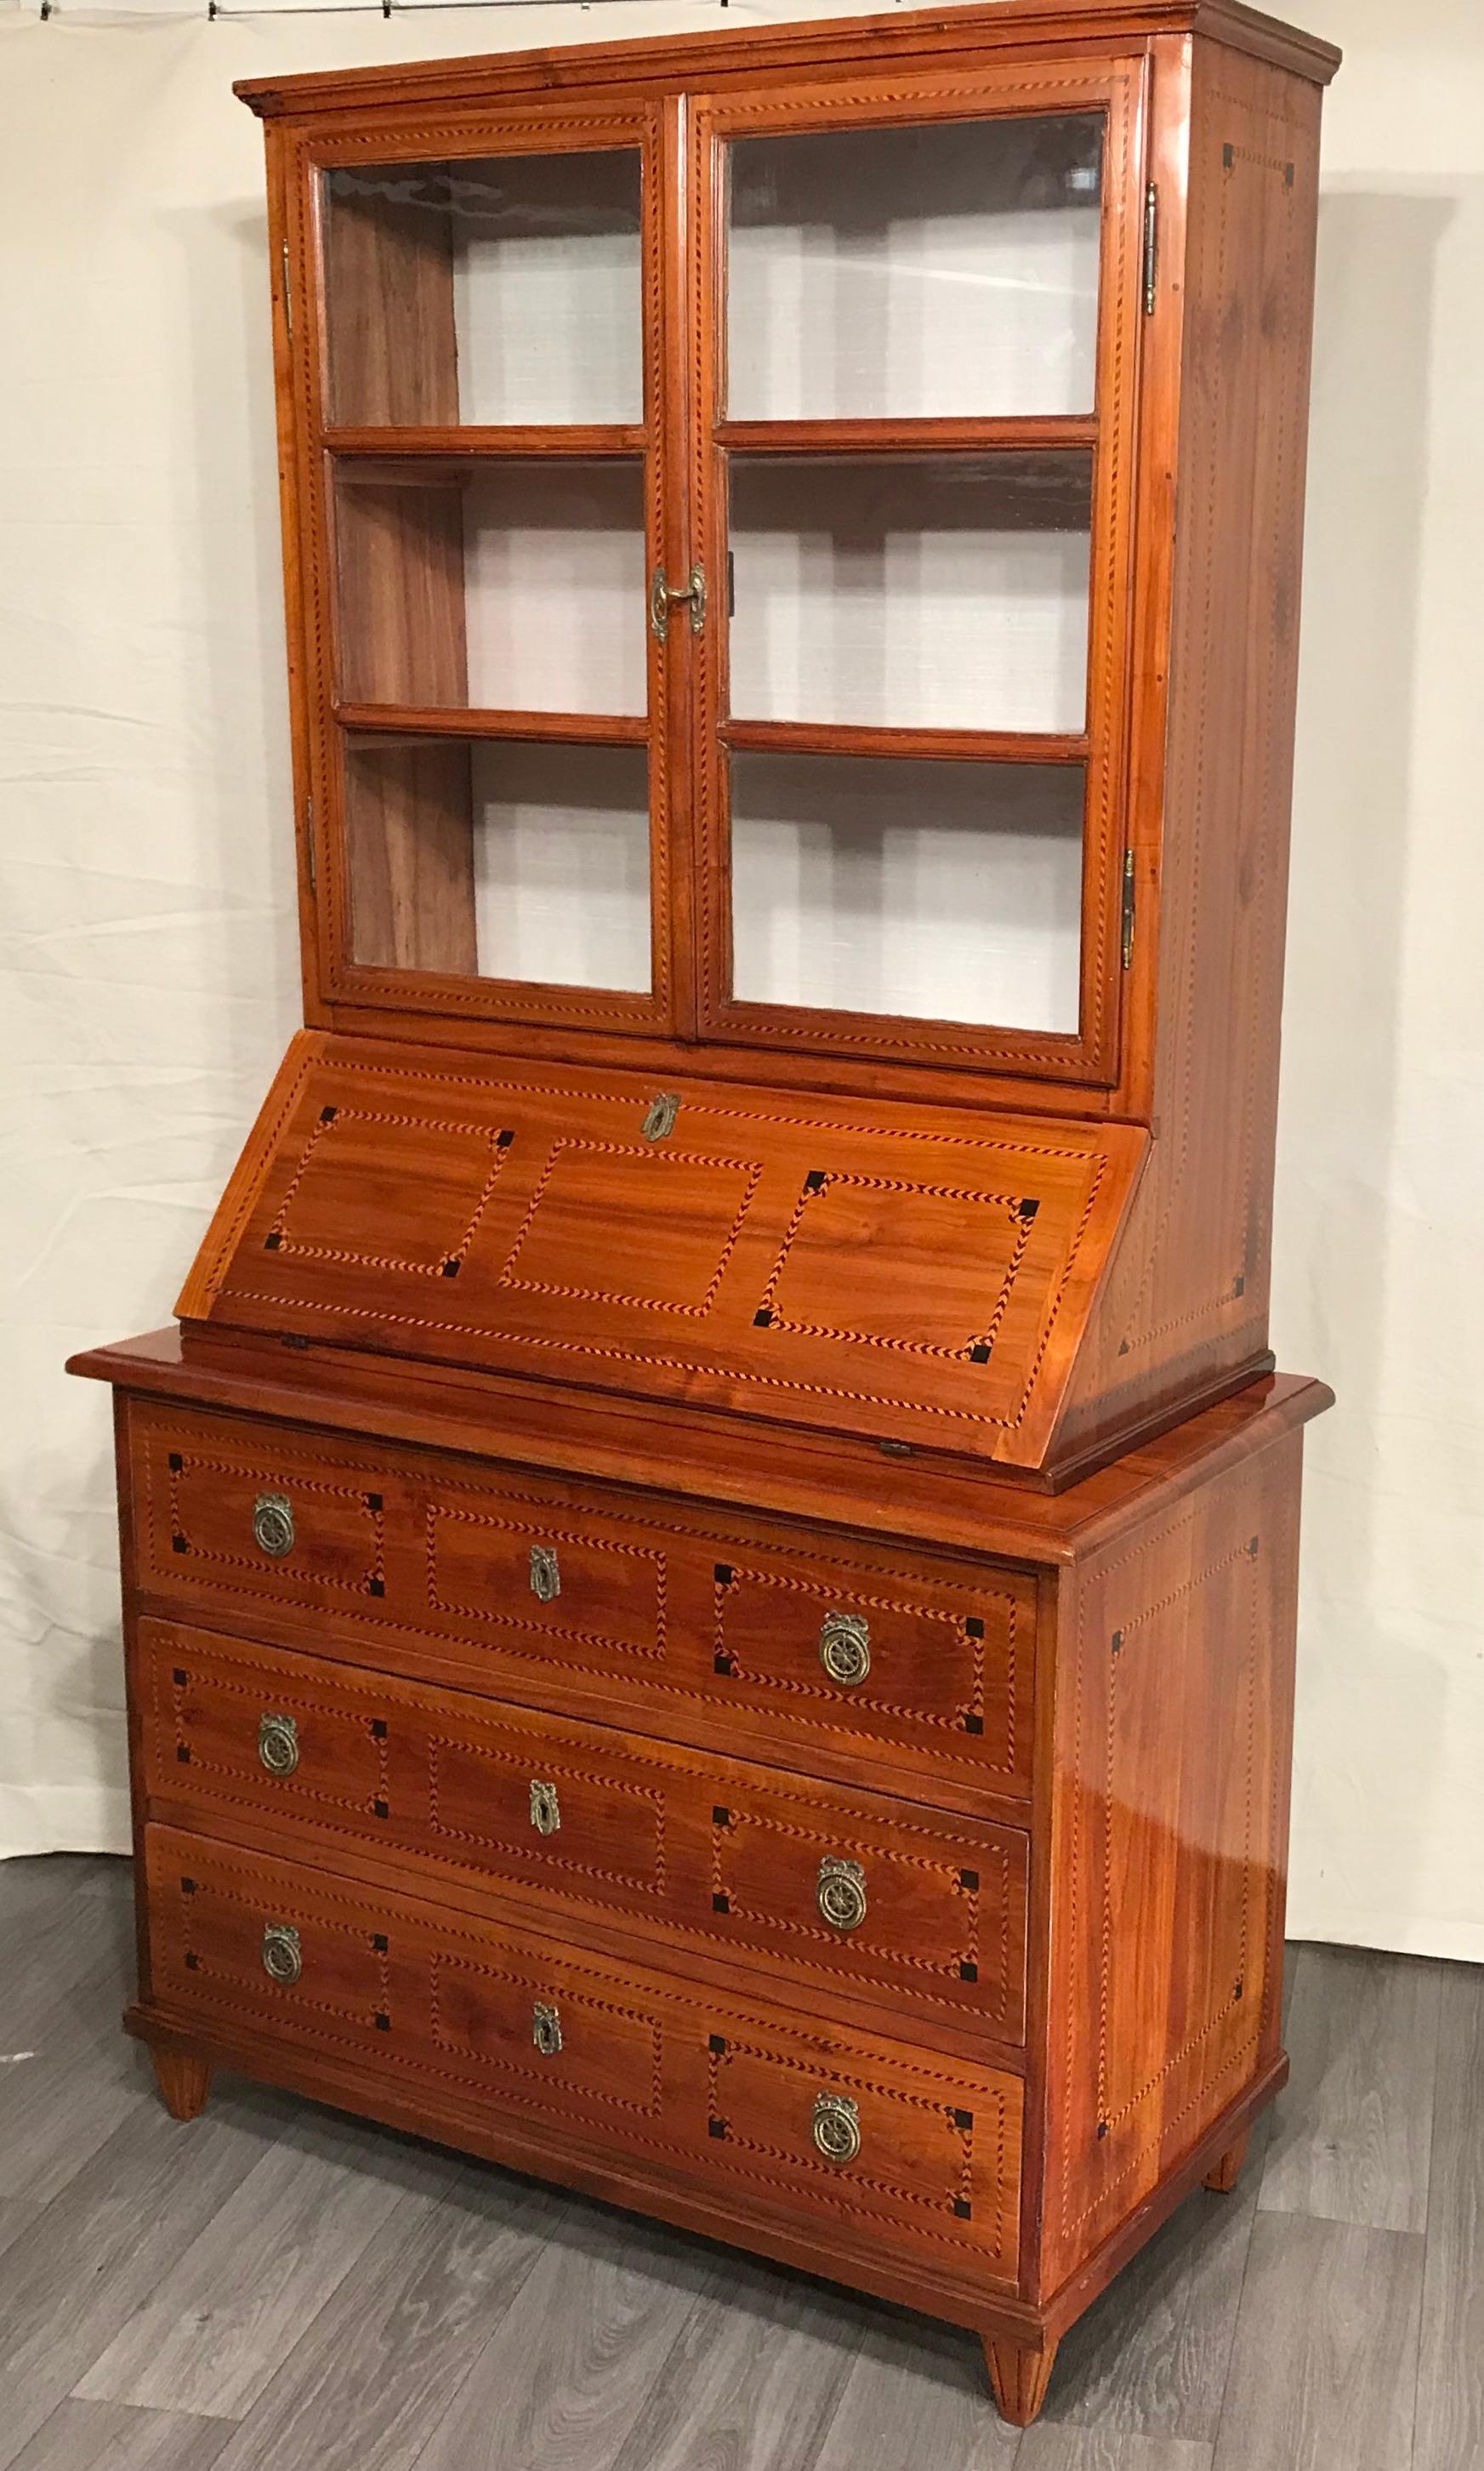 Louis XVI secretary bookcase, South German 1780.
Elegant and unique secretary bookcase with beautiful cherry veneer and Louis XVI style geometric inlays in king wood and maple. The lower part has three spacious drawers, the upper part has two glass